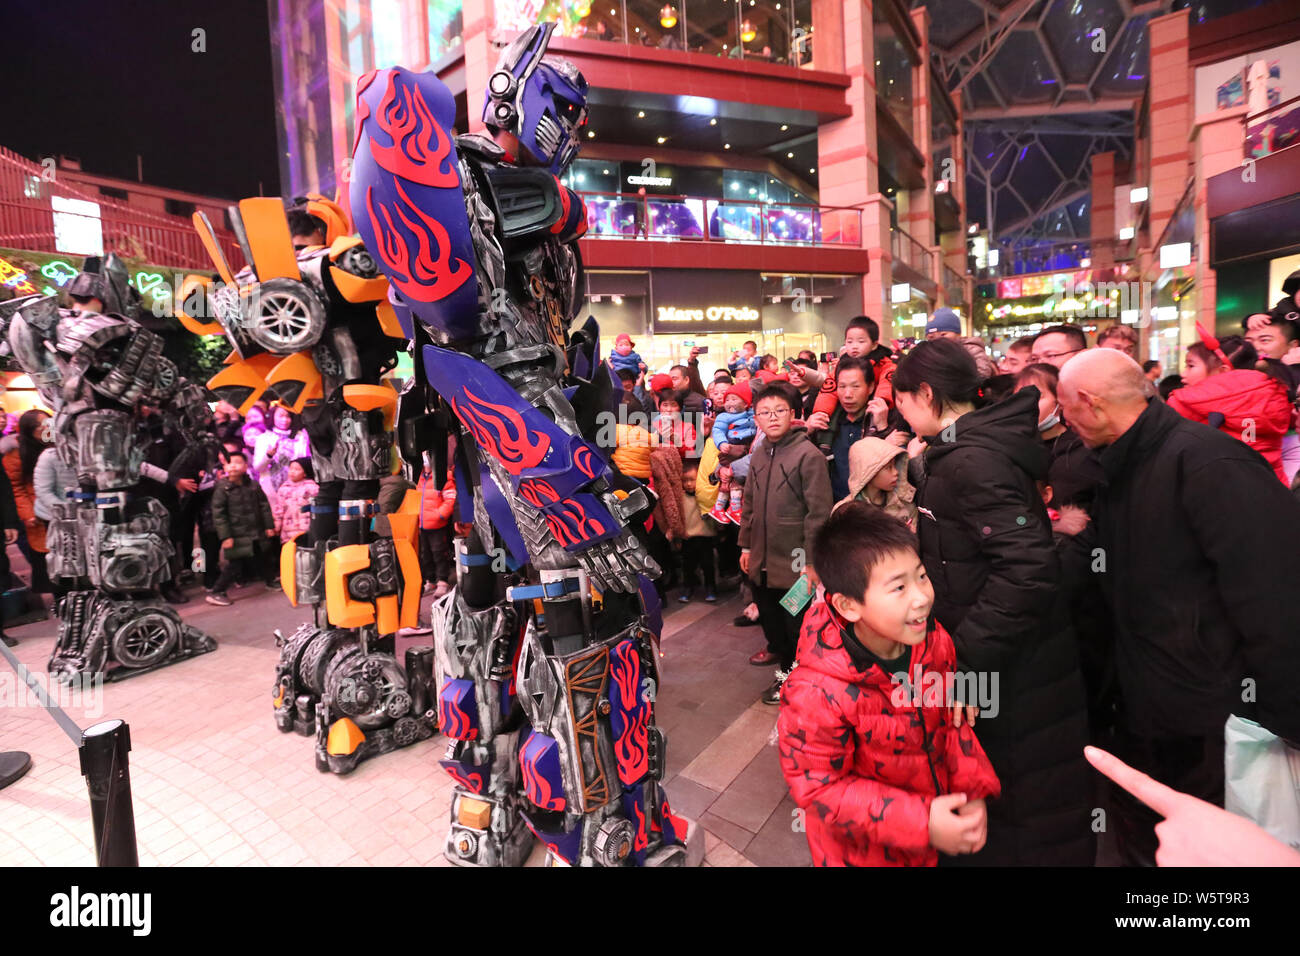 College students wearing two-meter-high life-size replicas of Megatron, Optimus Prime and Bumblebee are surrounded by customers at a shopping mall in Stock Photo